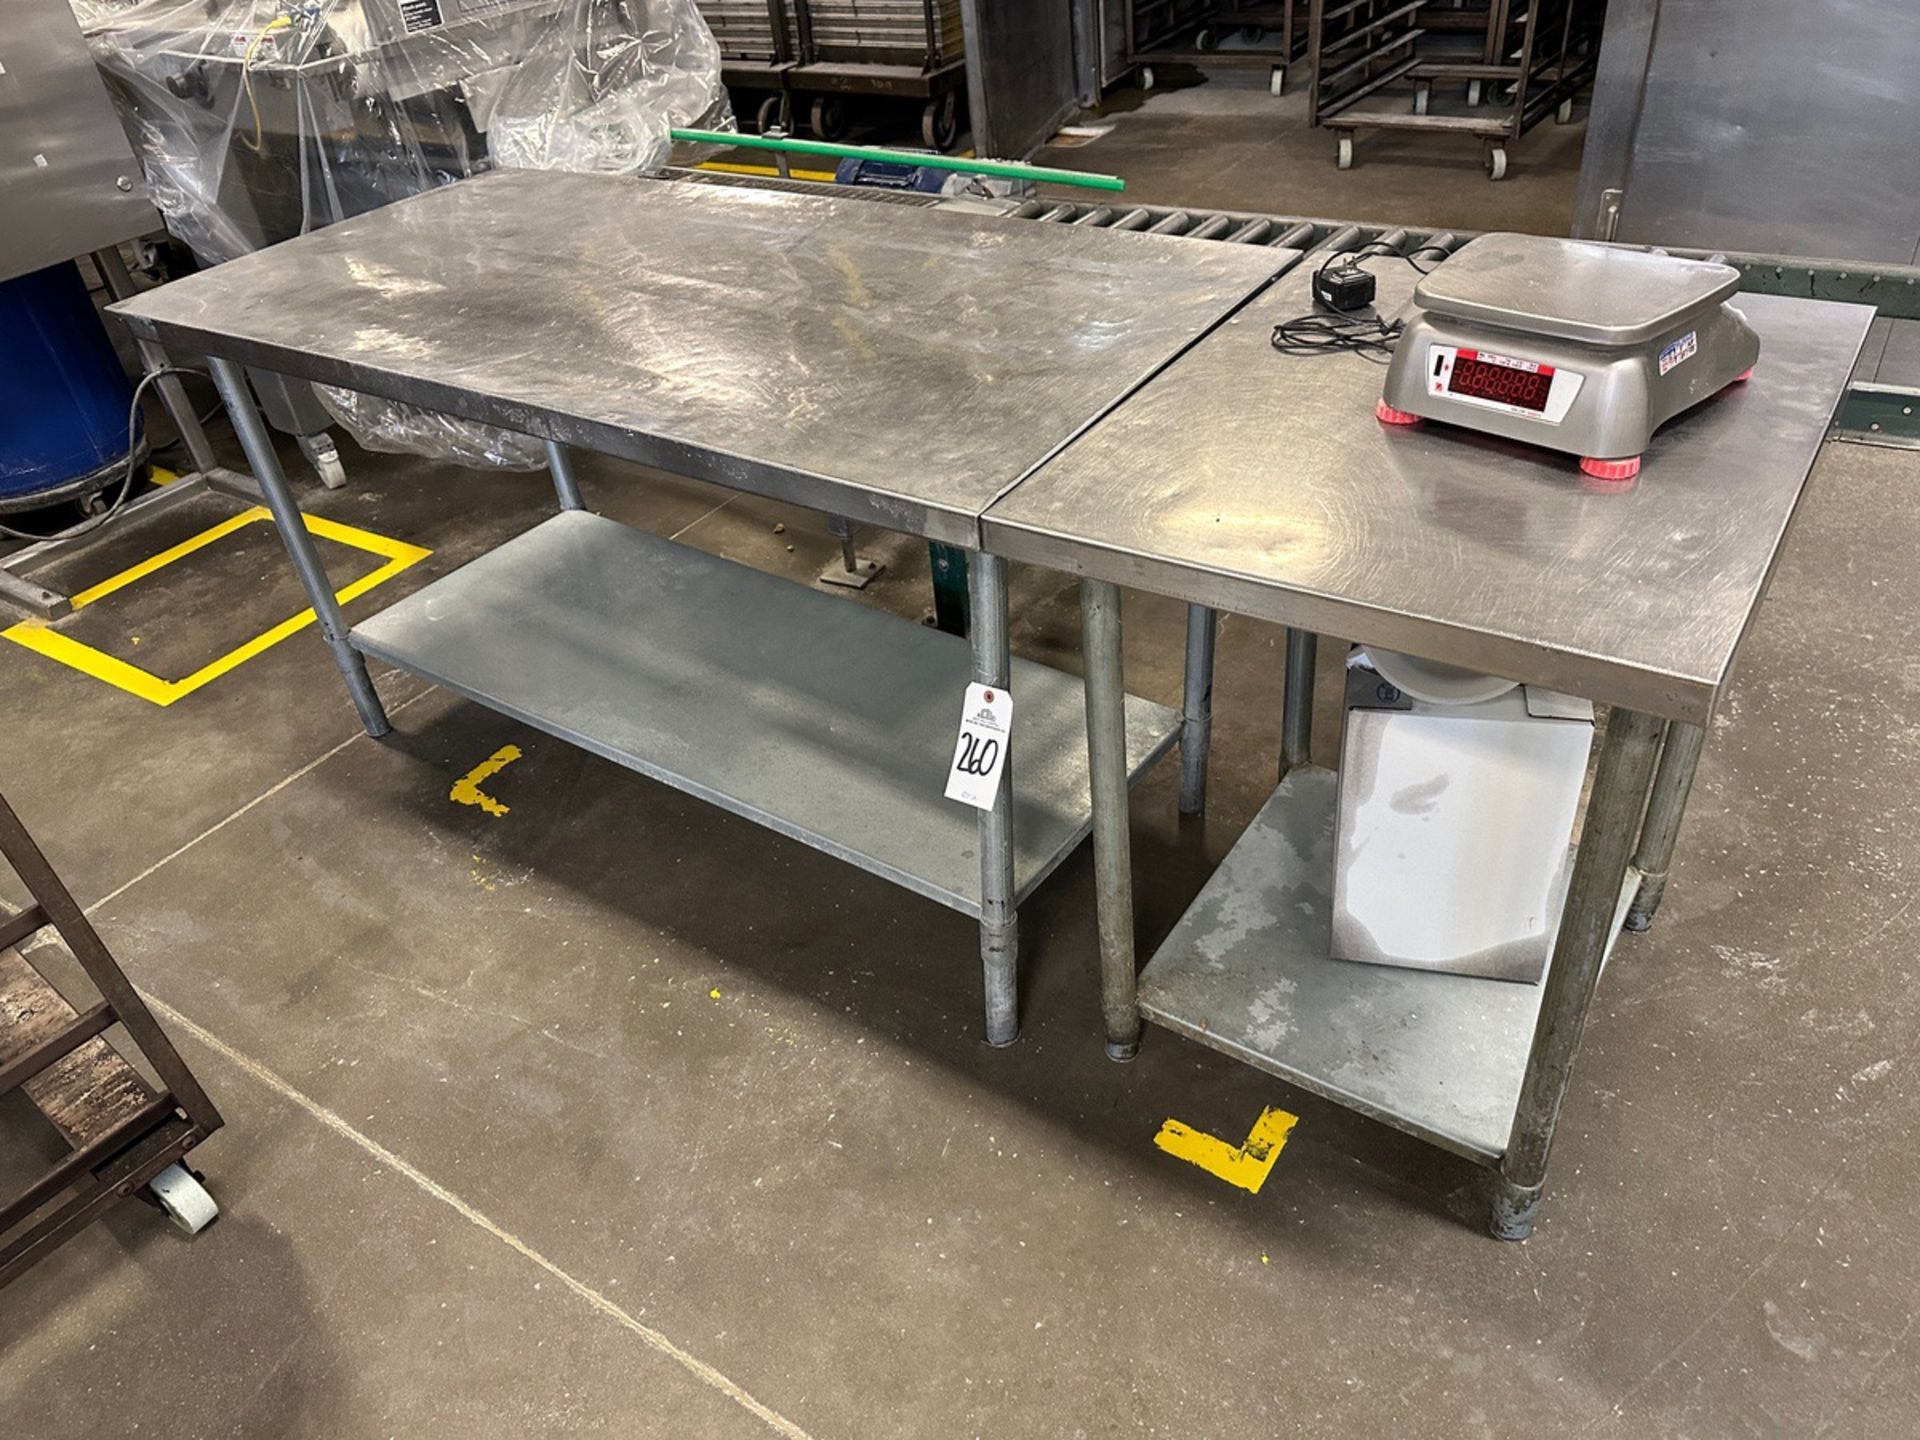 Lot of (2) Stainless Steel Tables (Approx. 30" x 5' and 30" x 2') | Rig Fee $75